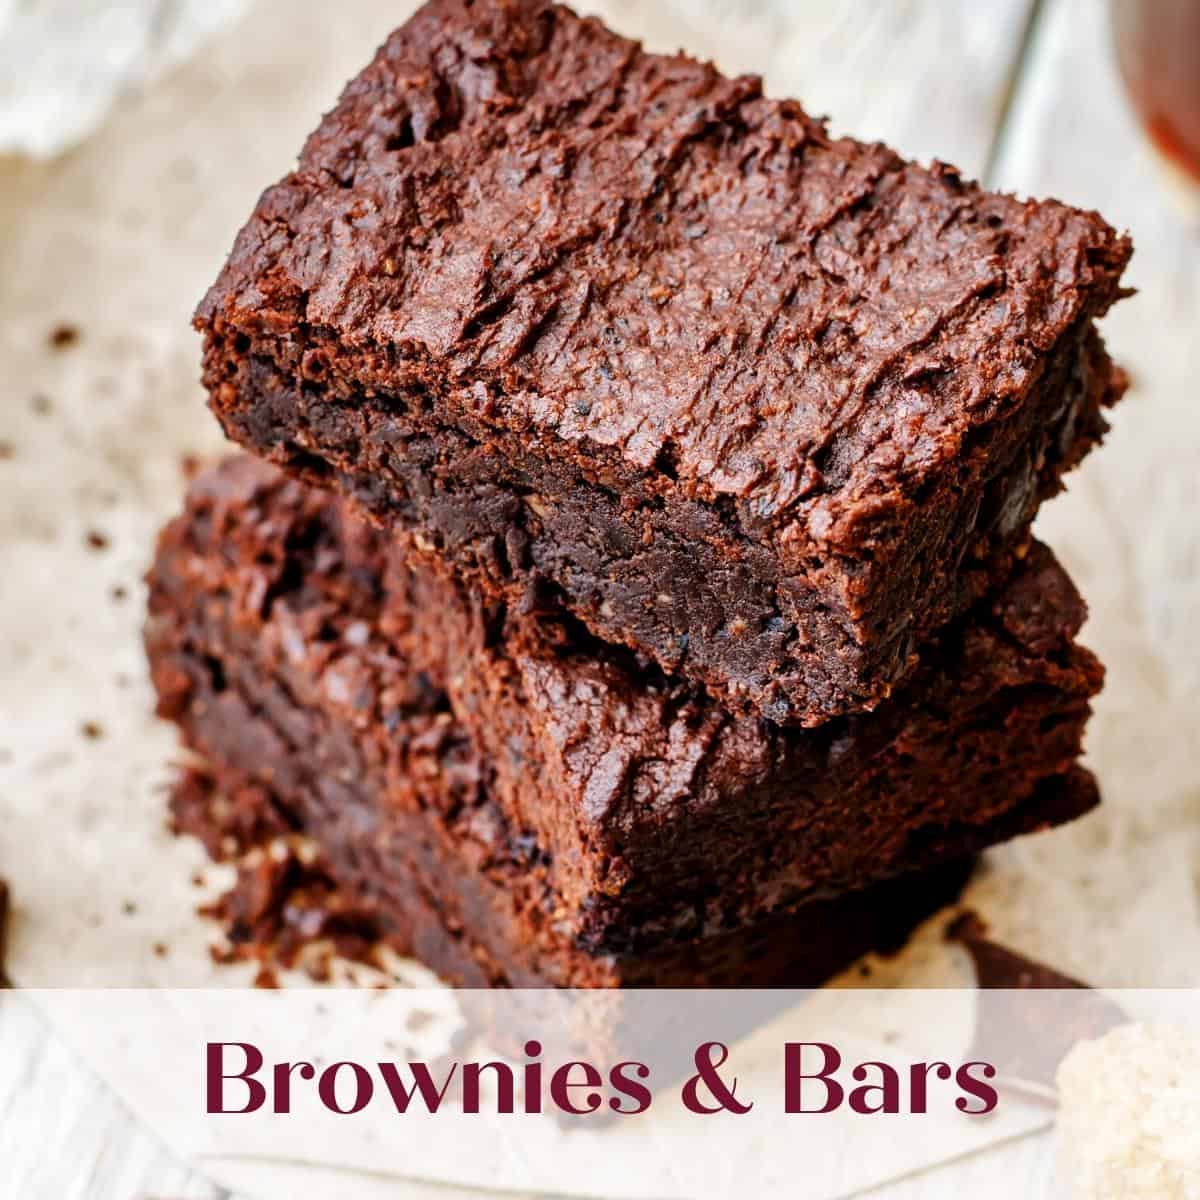 Brownie and bar category graphic with stacked brownies.